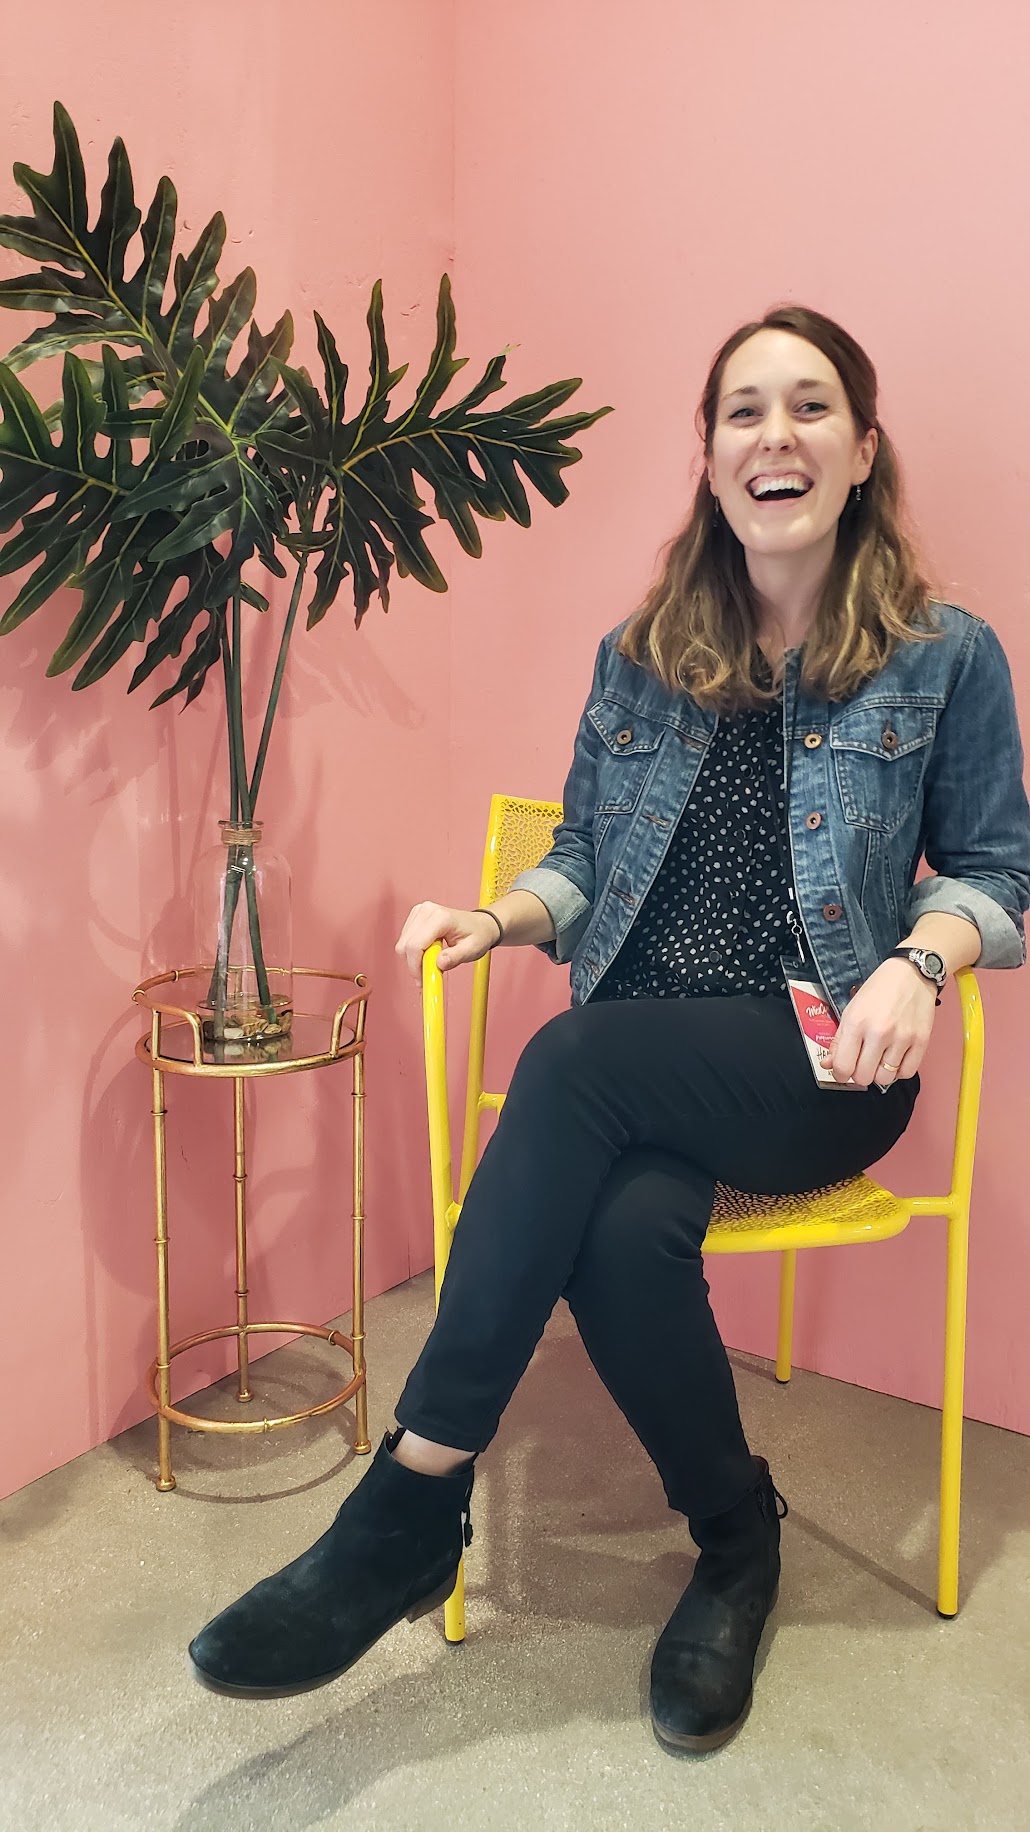 Women laughing while sitting in a yellow chair in front of pink walls and a large plant.